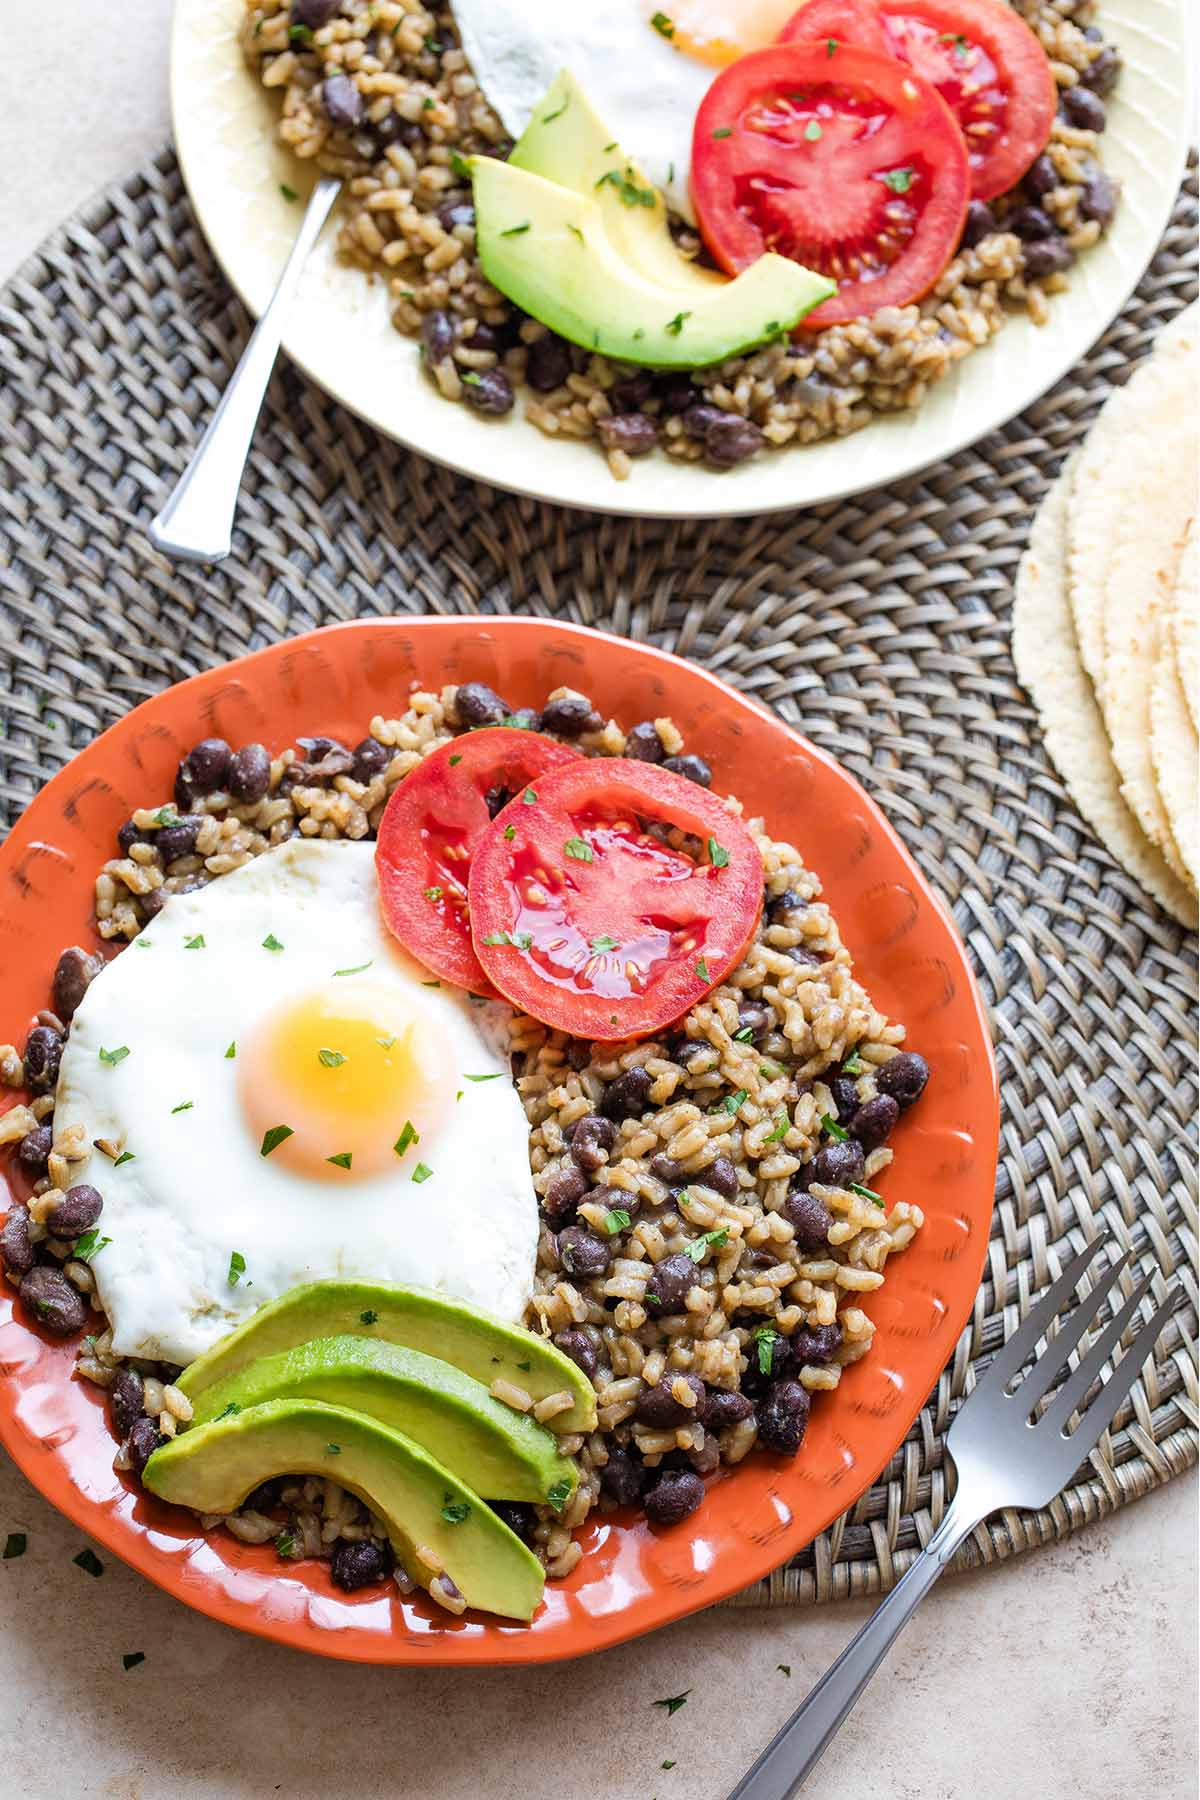 Flatlay of two platefuls of Gallo Pinto with toppings, sitting on round woven mat with forks and stack of tortillas nearby.